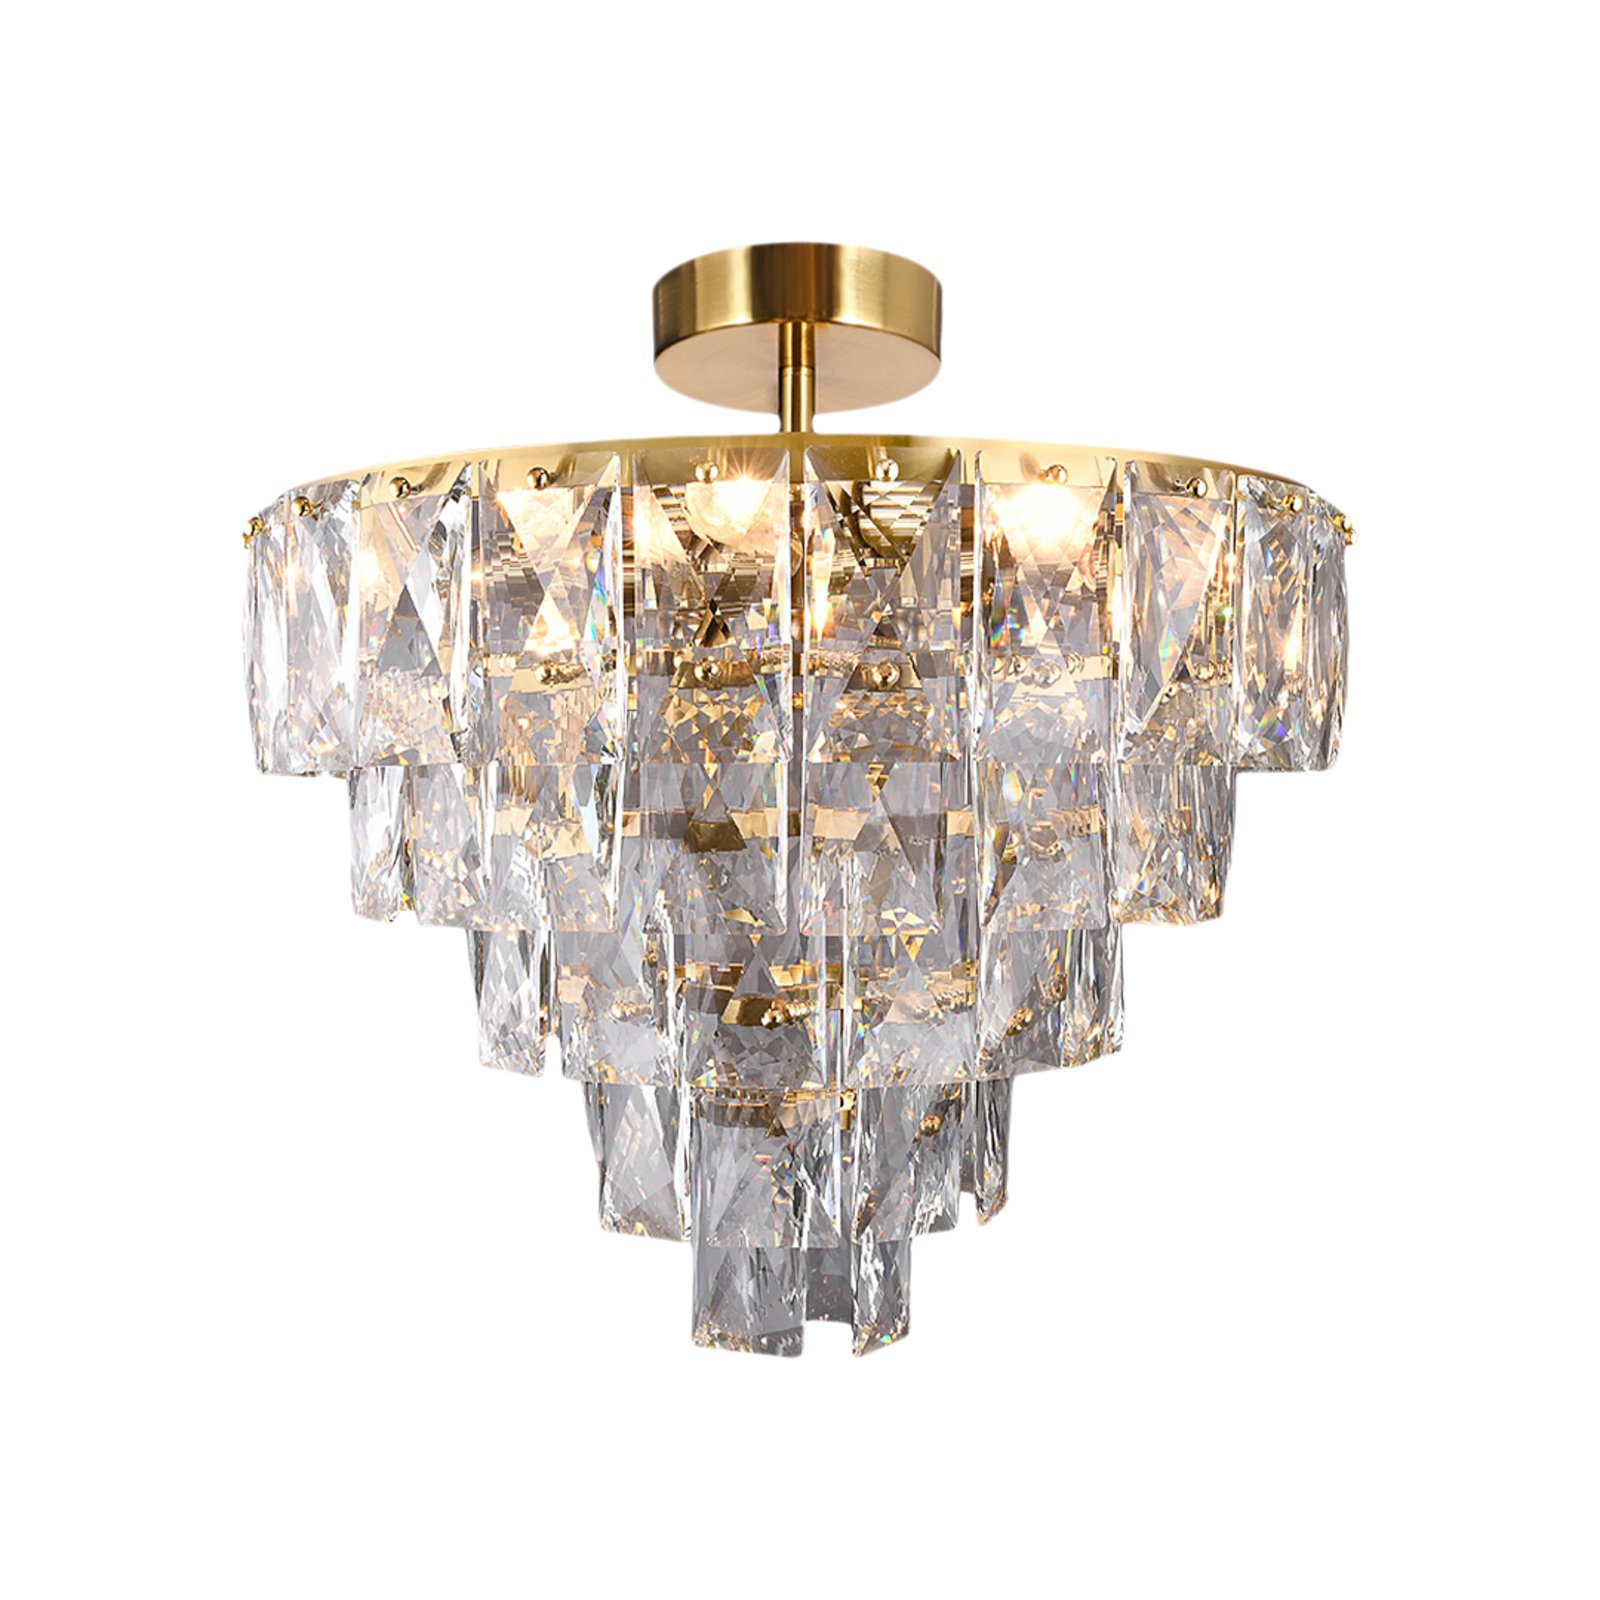 Chelsea metal ceiling lamp gold-coloured glass crystals, Ø 50 cm